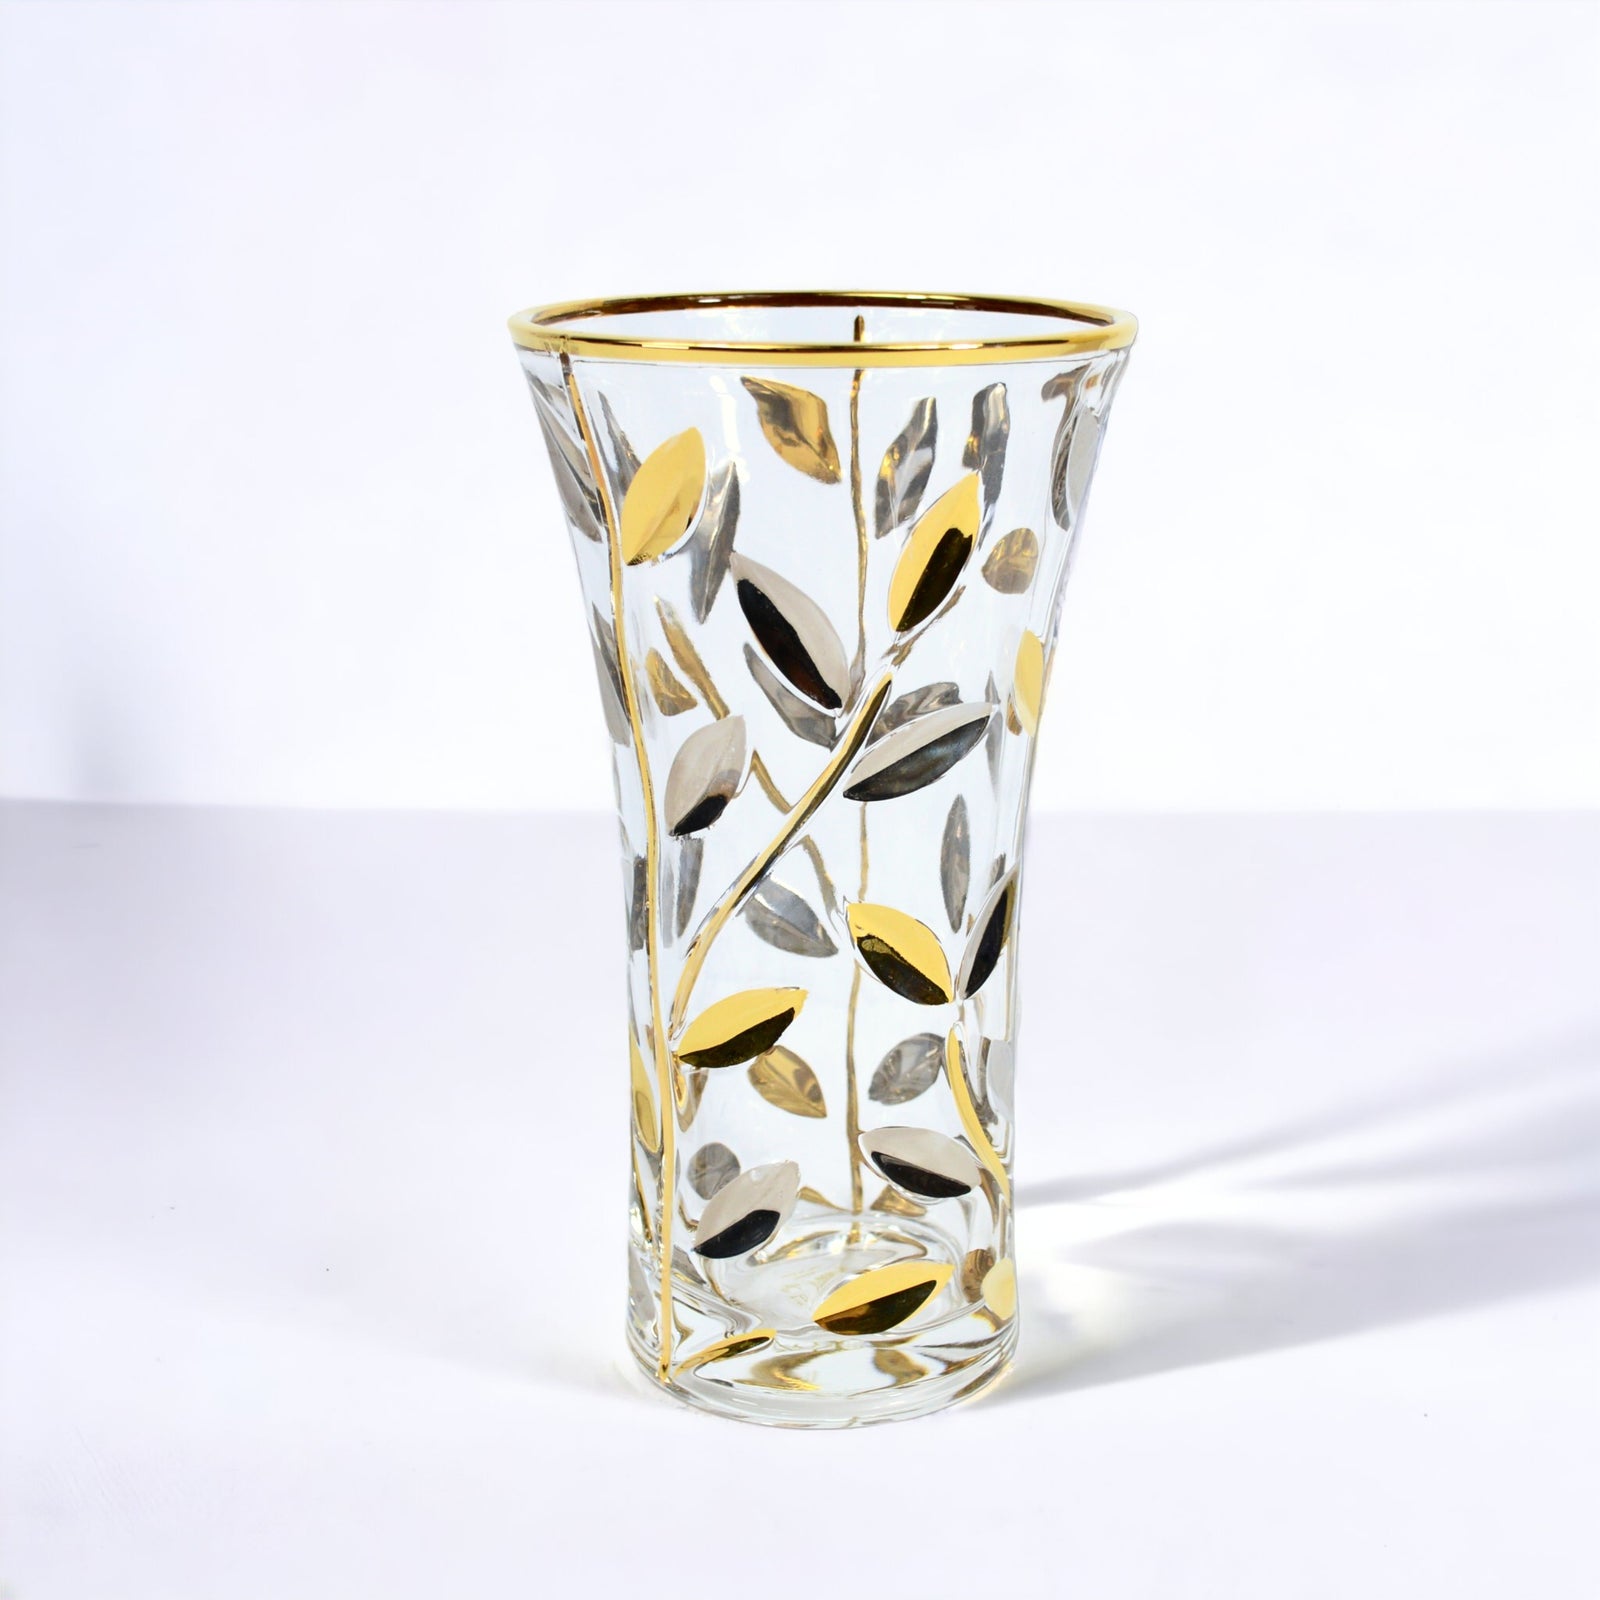 Luxury Hand Blown Glass Vase - Etched & Painted Gold Leaves - Unique S